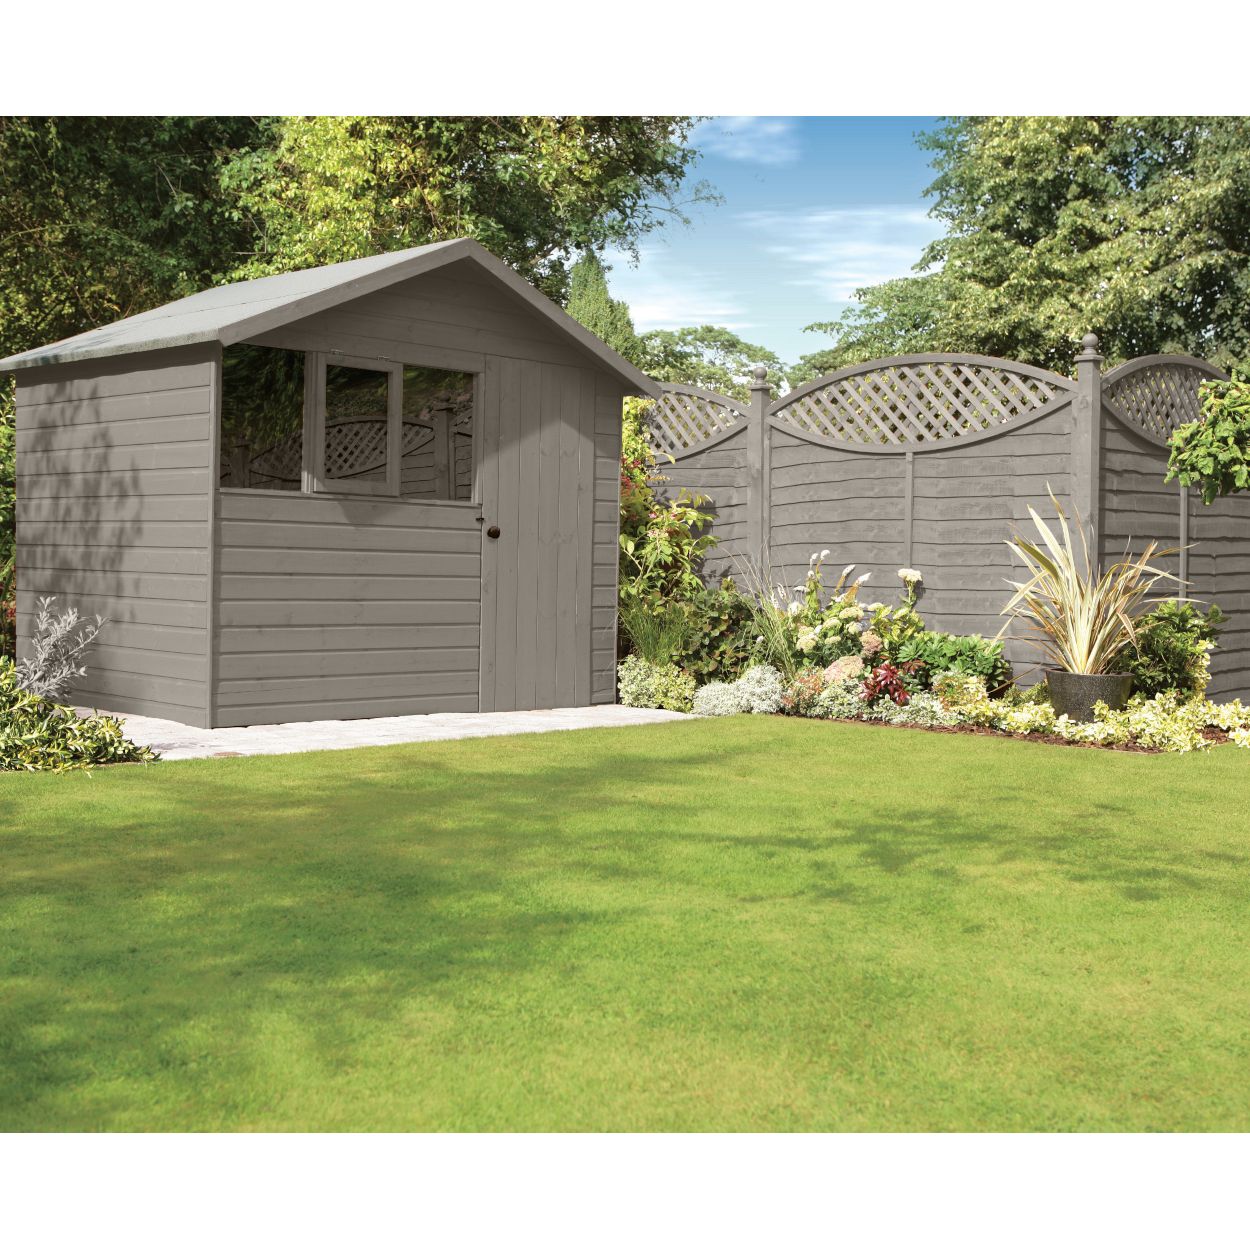 How to Paint Your Shed or Fence: A Step-by-Step Guide